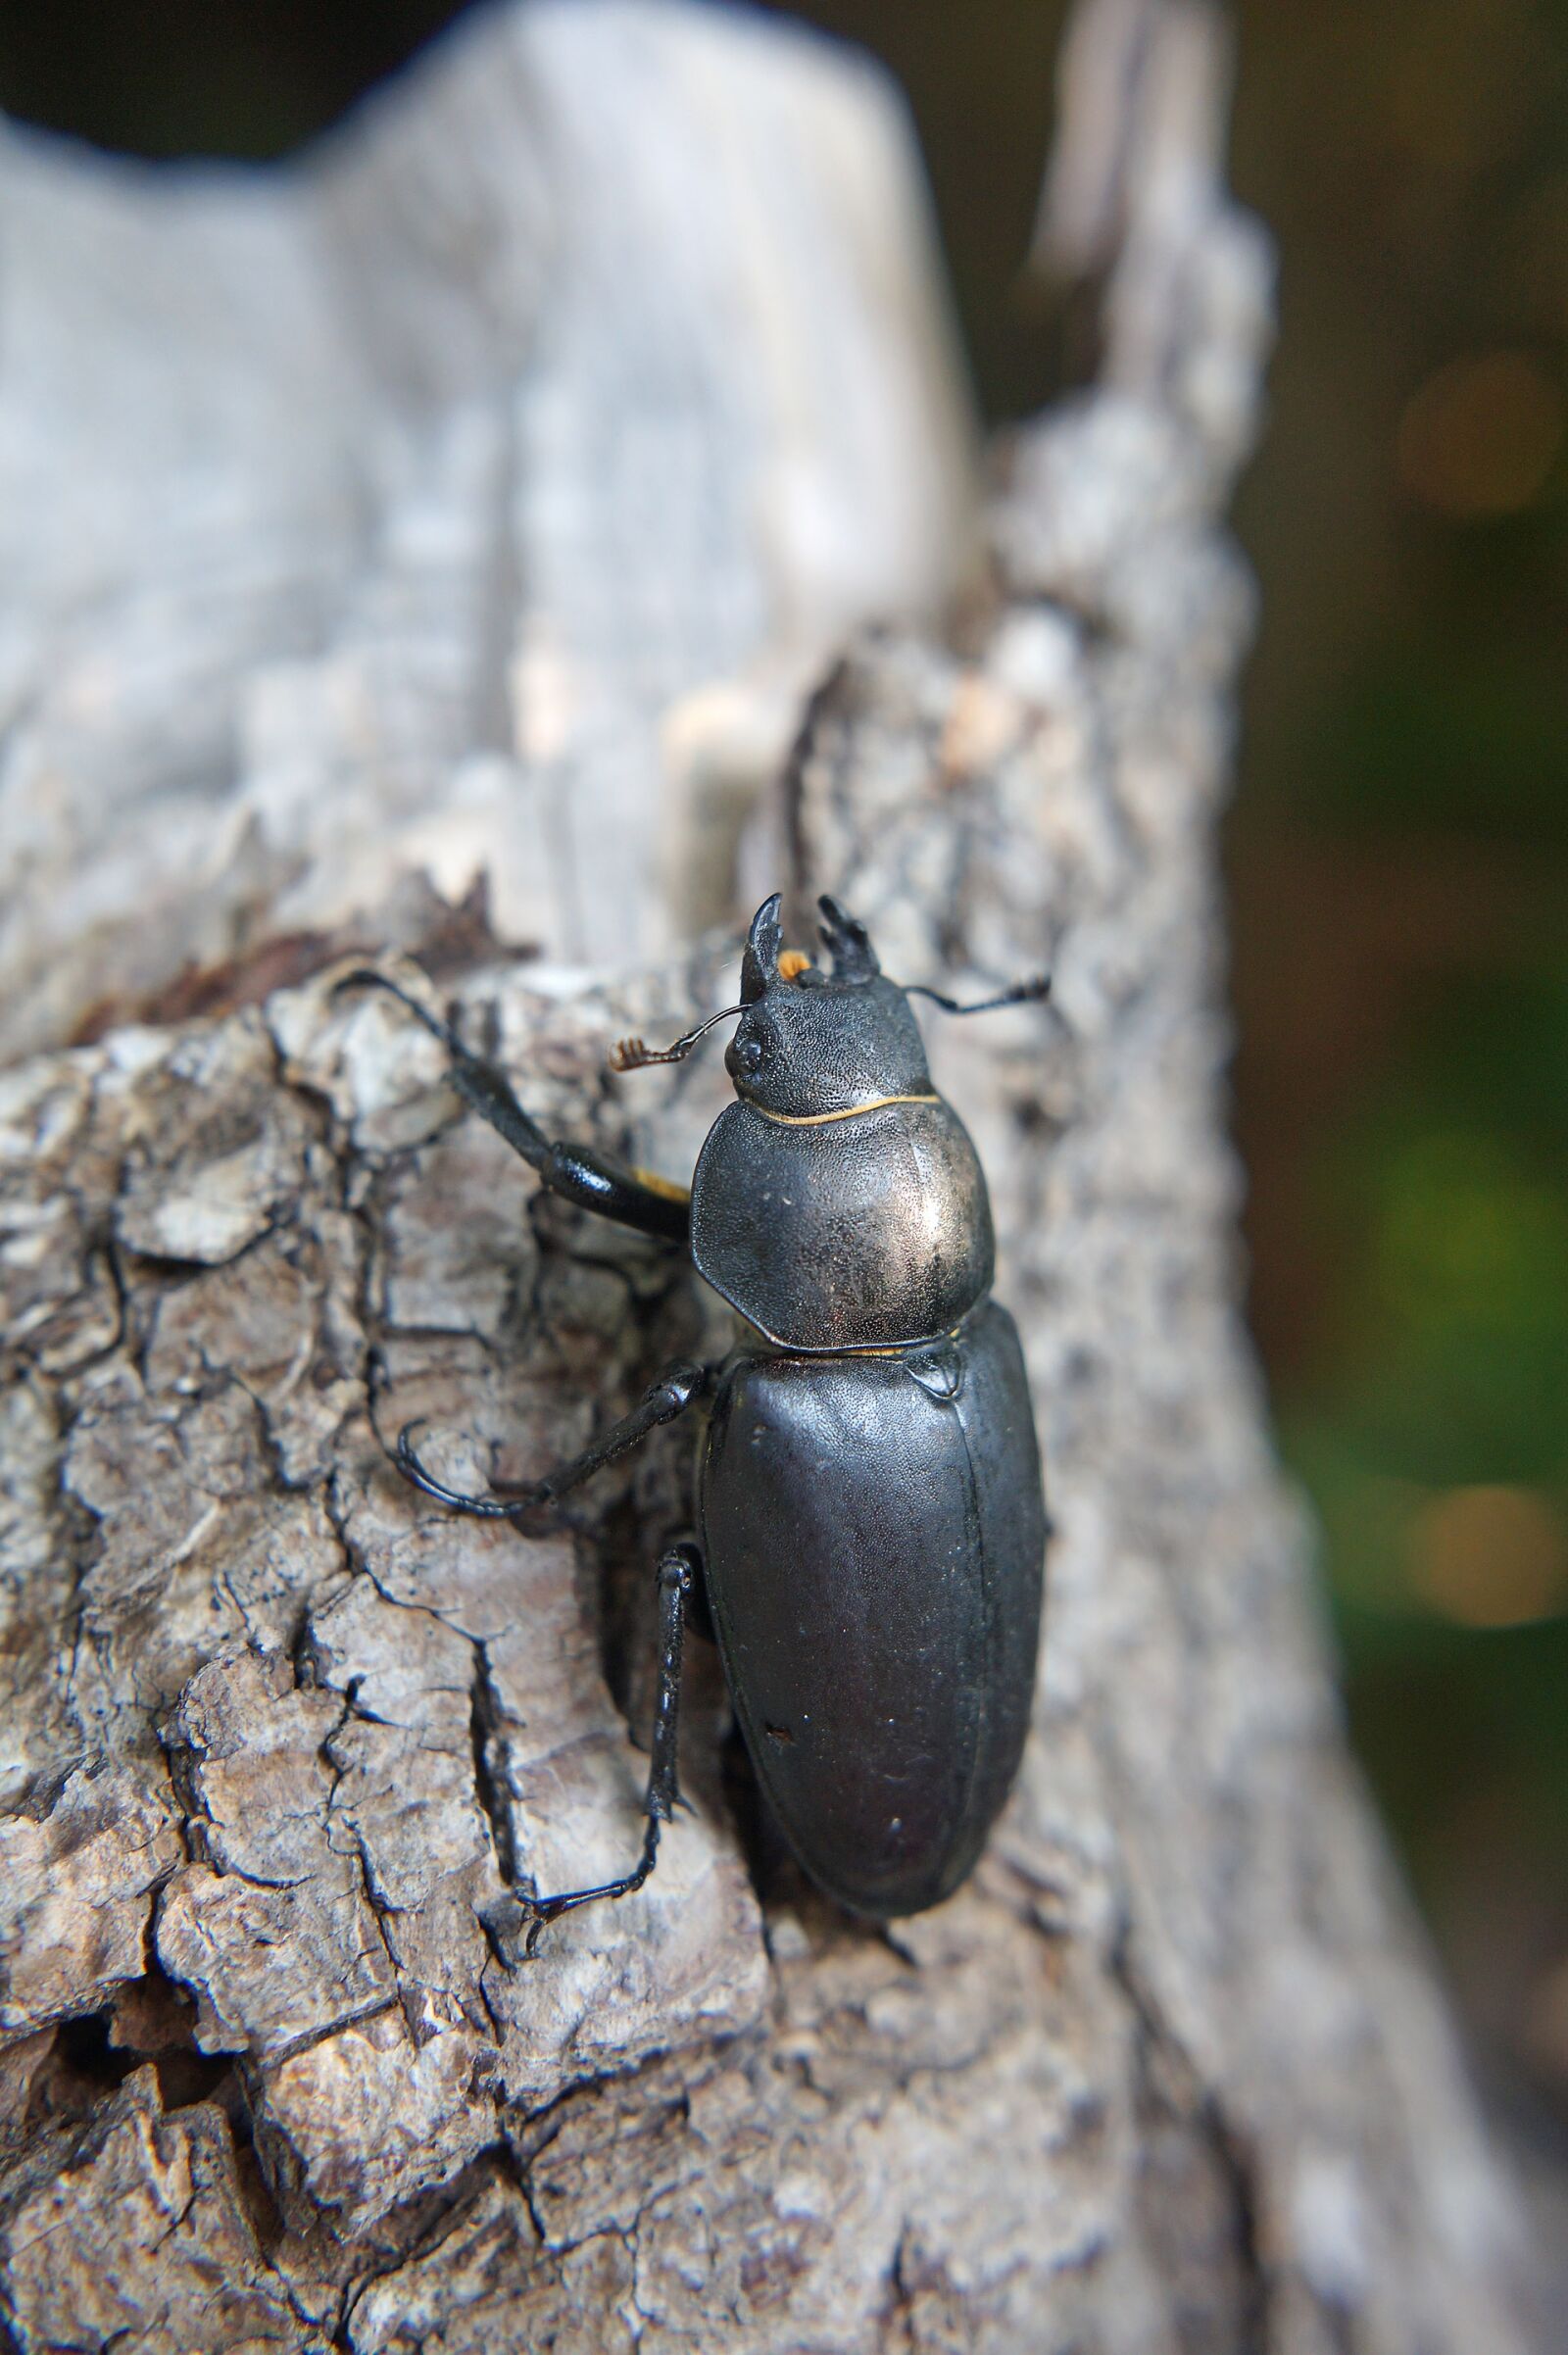 Sony E 20mm F2.8 sample photo. Beetle, stag beetle, great photography